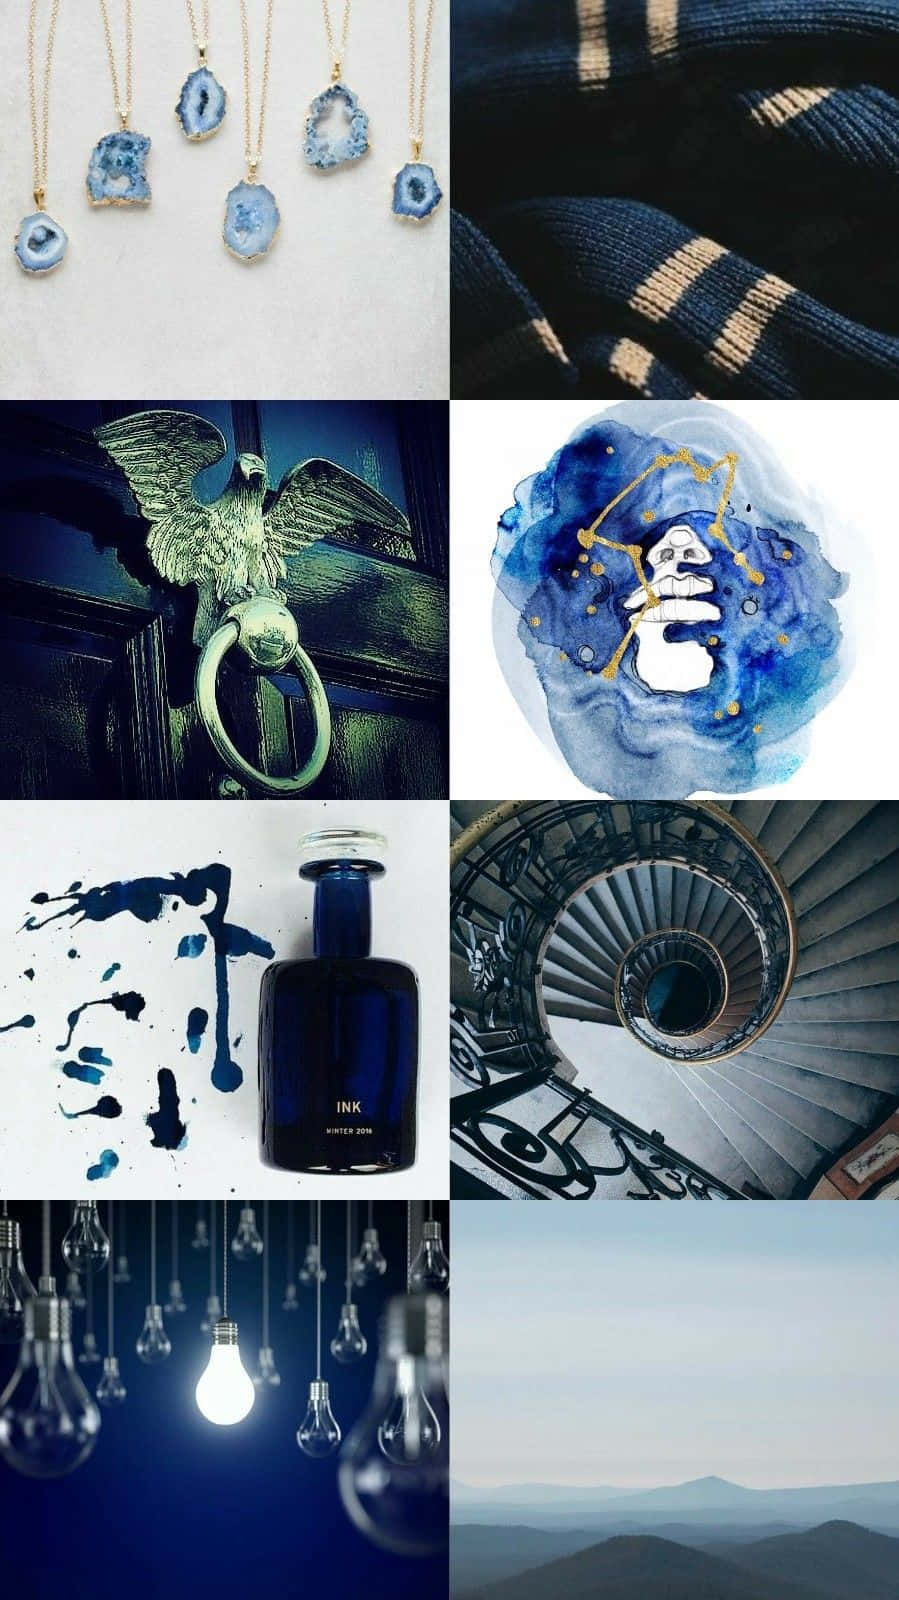 "Ravenclaw Aesthetic - the House of Wisdom, Wit, and Creativity" Wallpaper